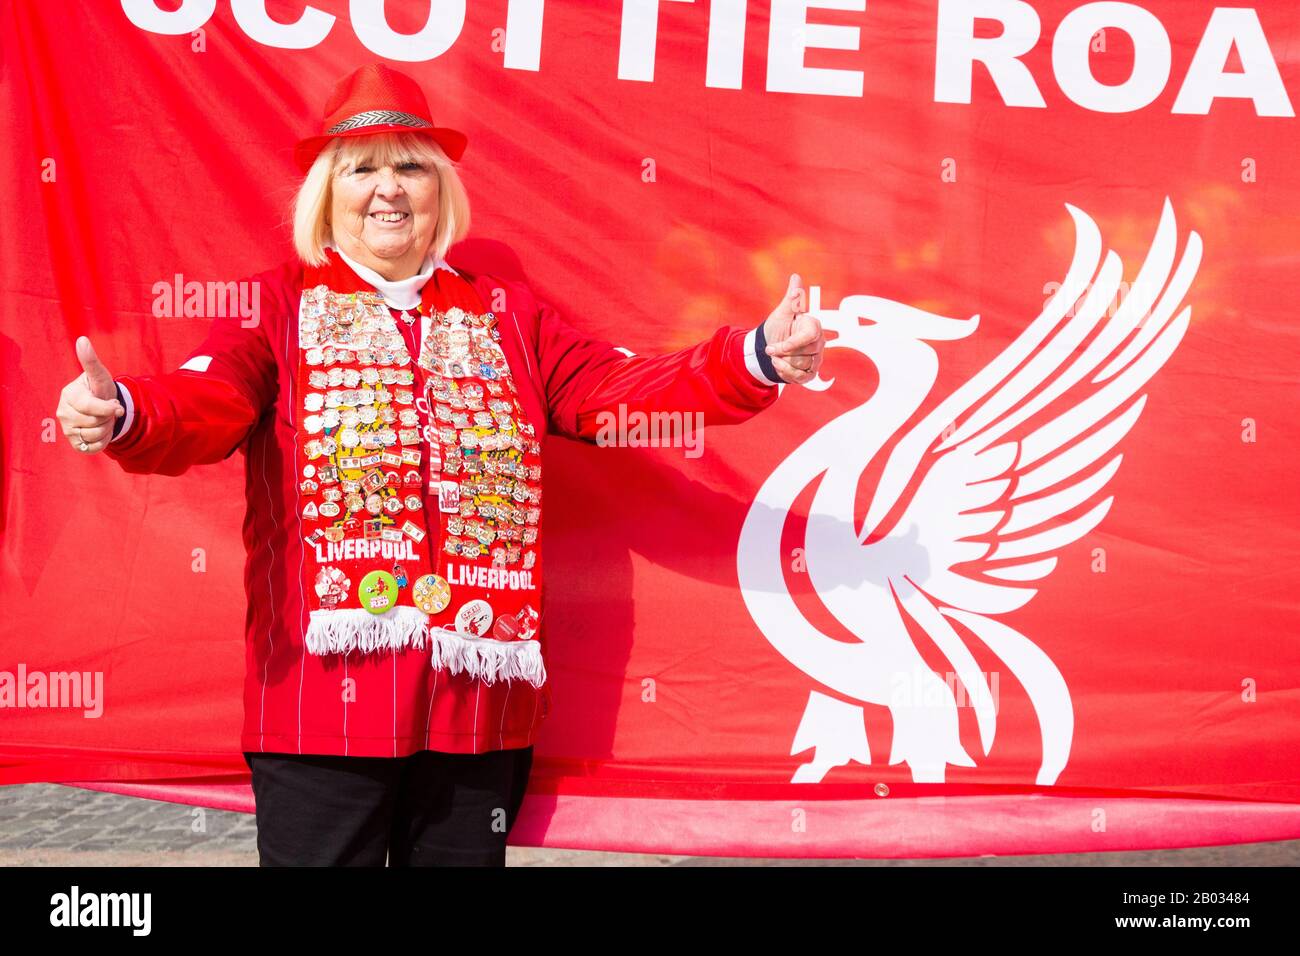 Madrid, Spain. 18th February 2020.  Liverpool fans gather in Plaza Mayor in Madrid ahead of Liverpool's last 16 Champions league game against Atletico Madrid. Credit: Alan Dawson/Alamy Live News Stock Photo